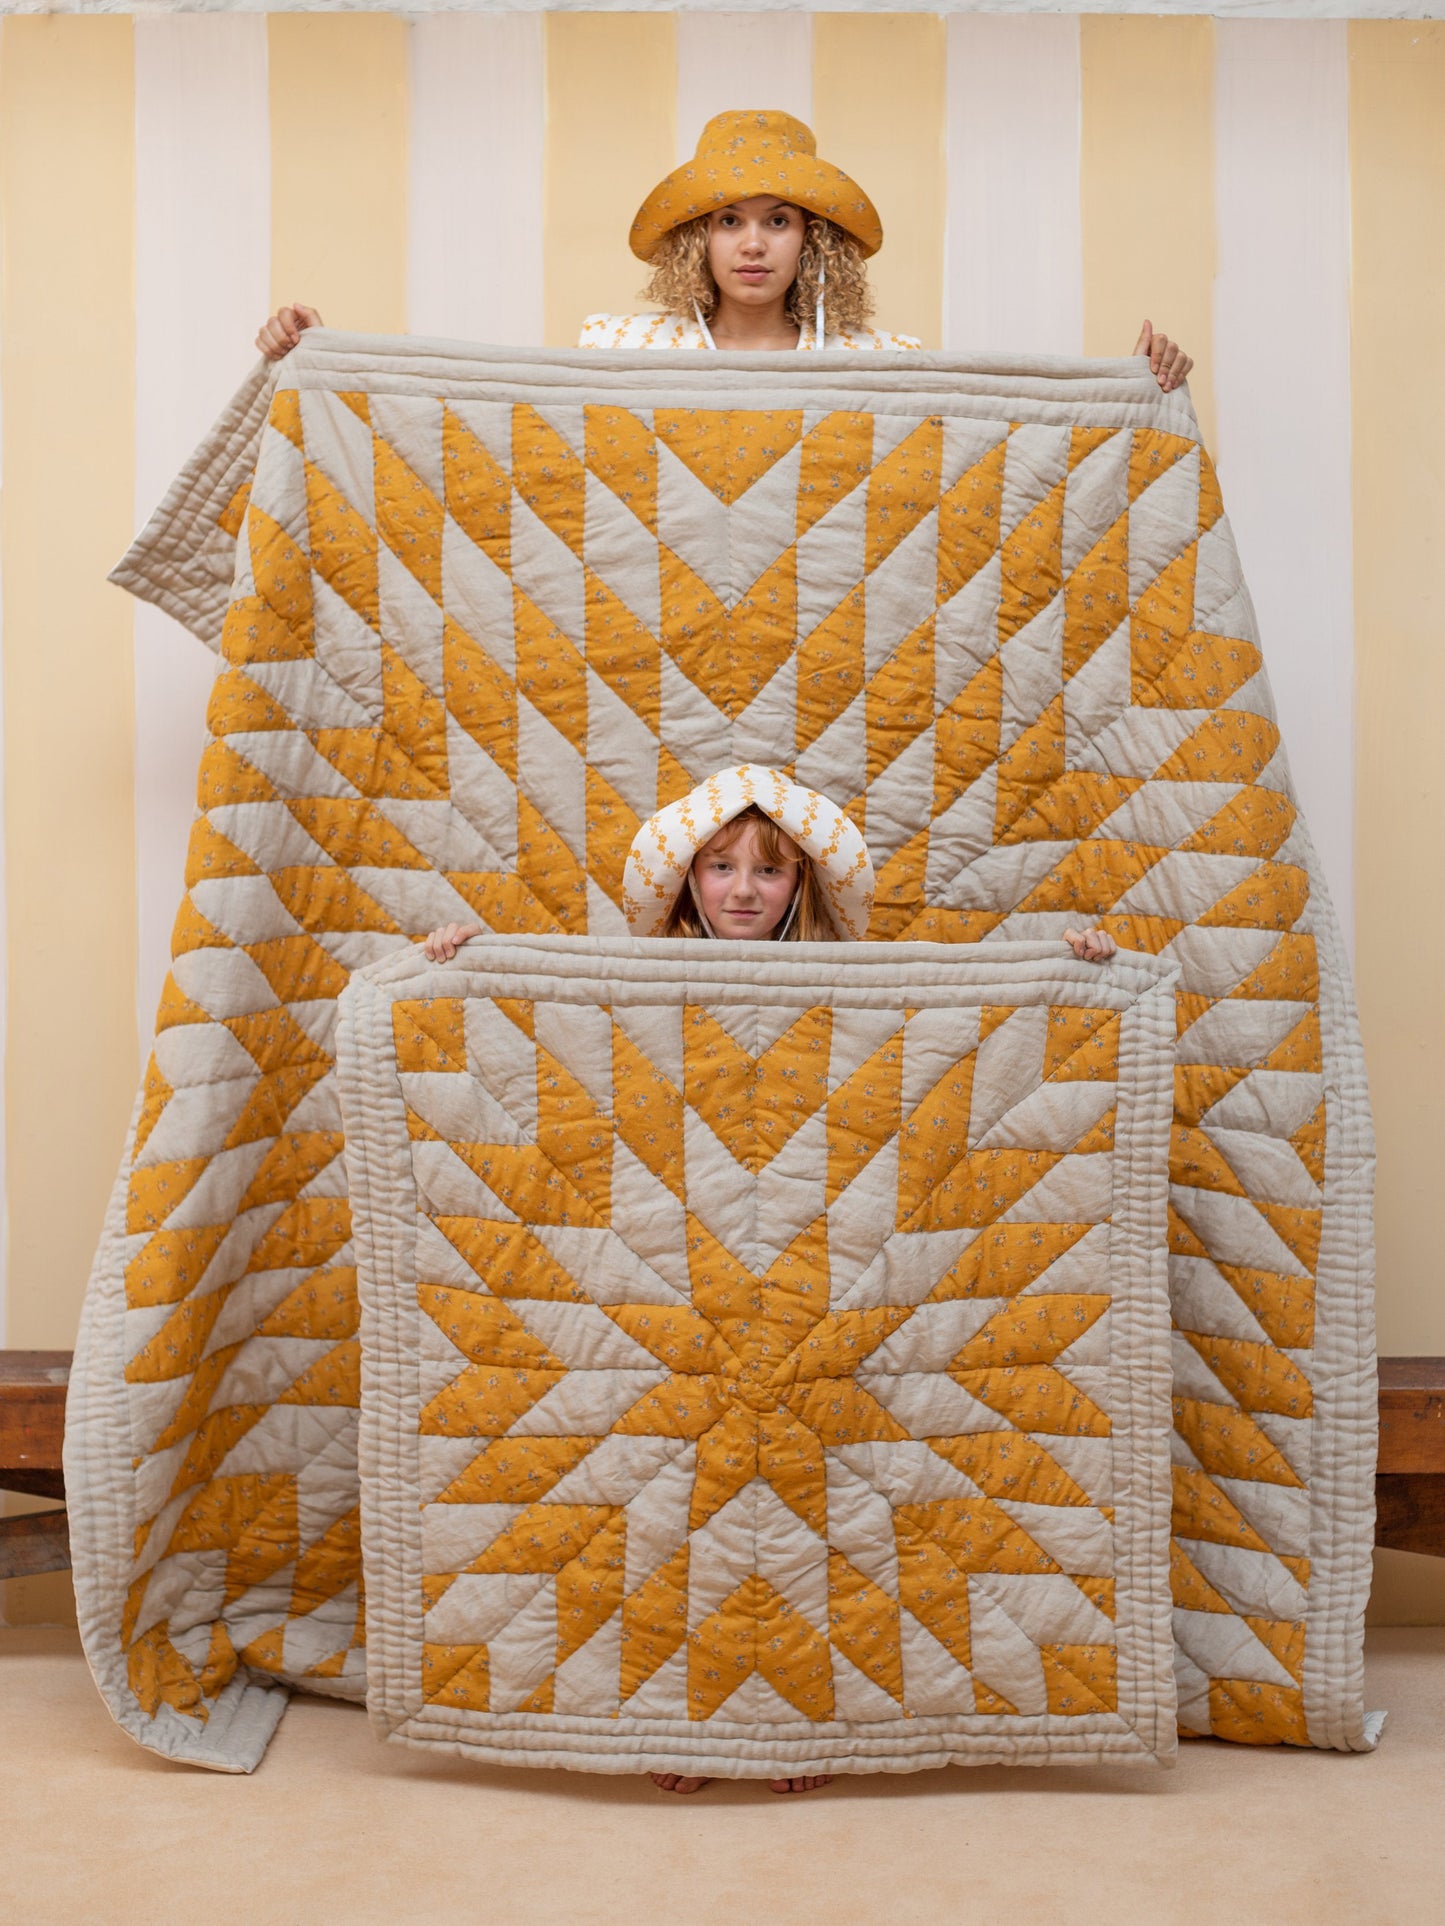 Timantti Patchwork Honeycomb Baby Quilt